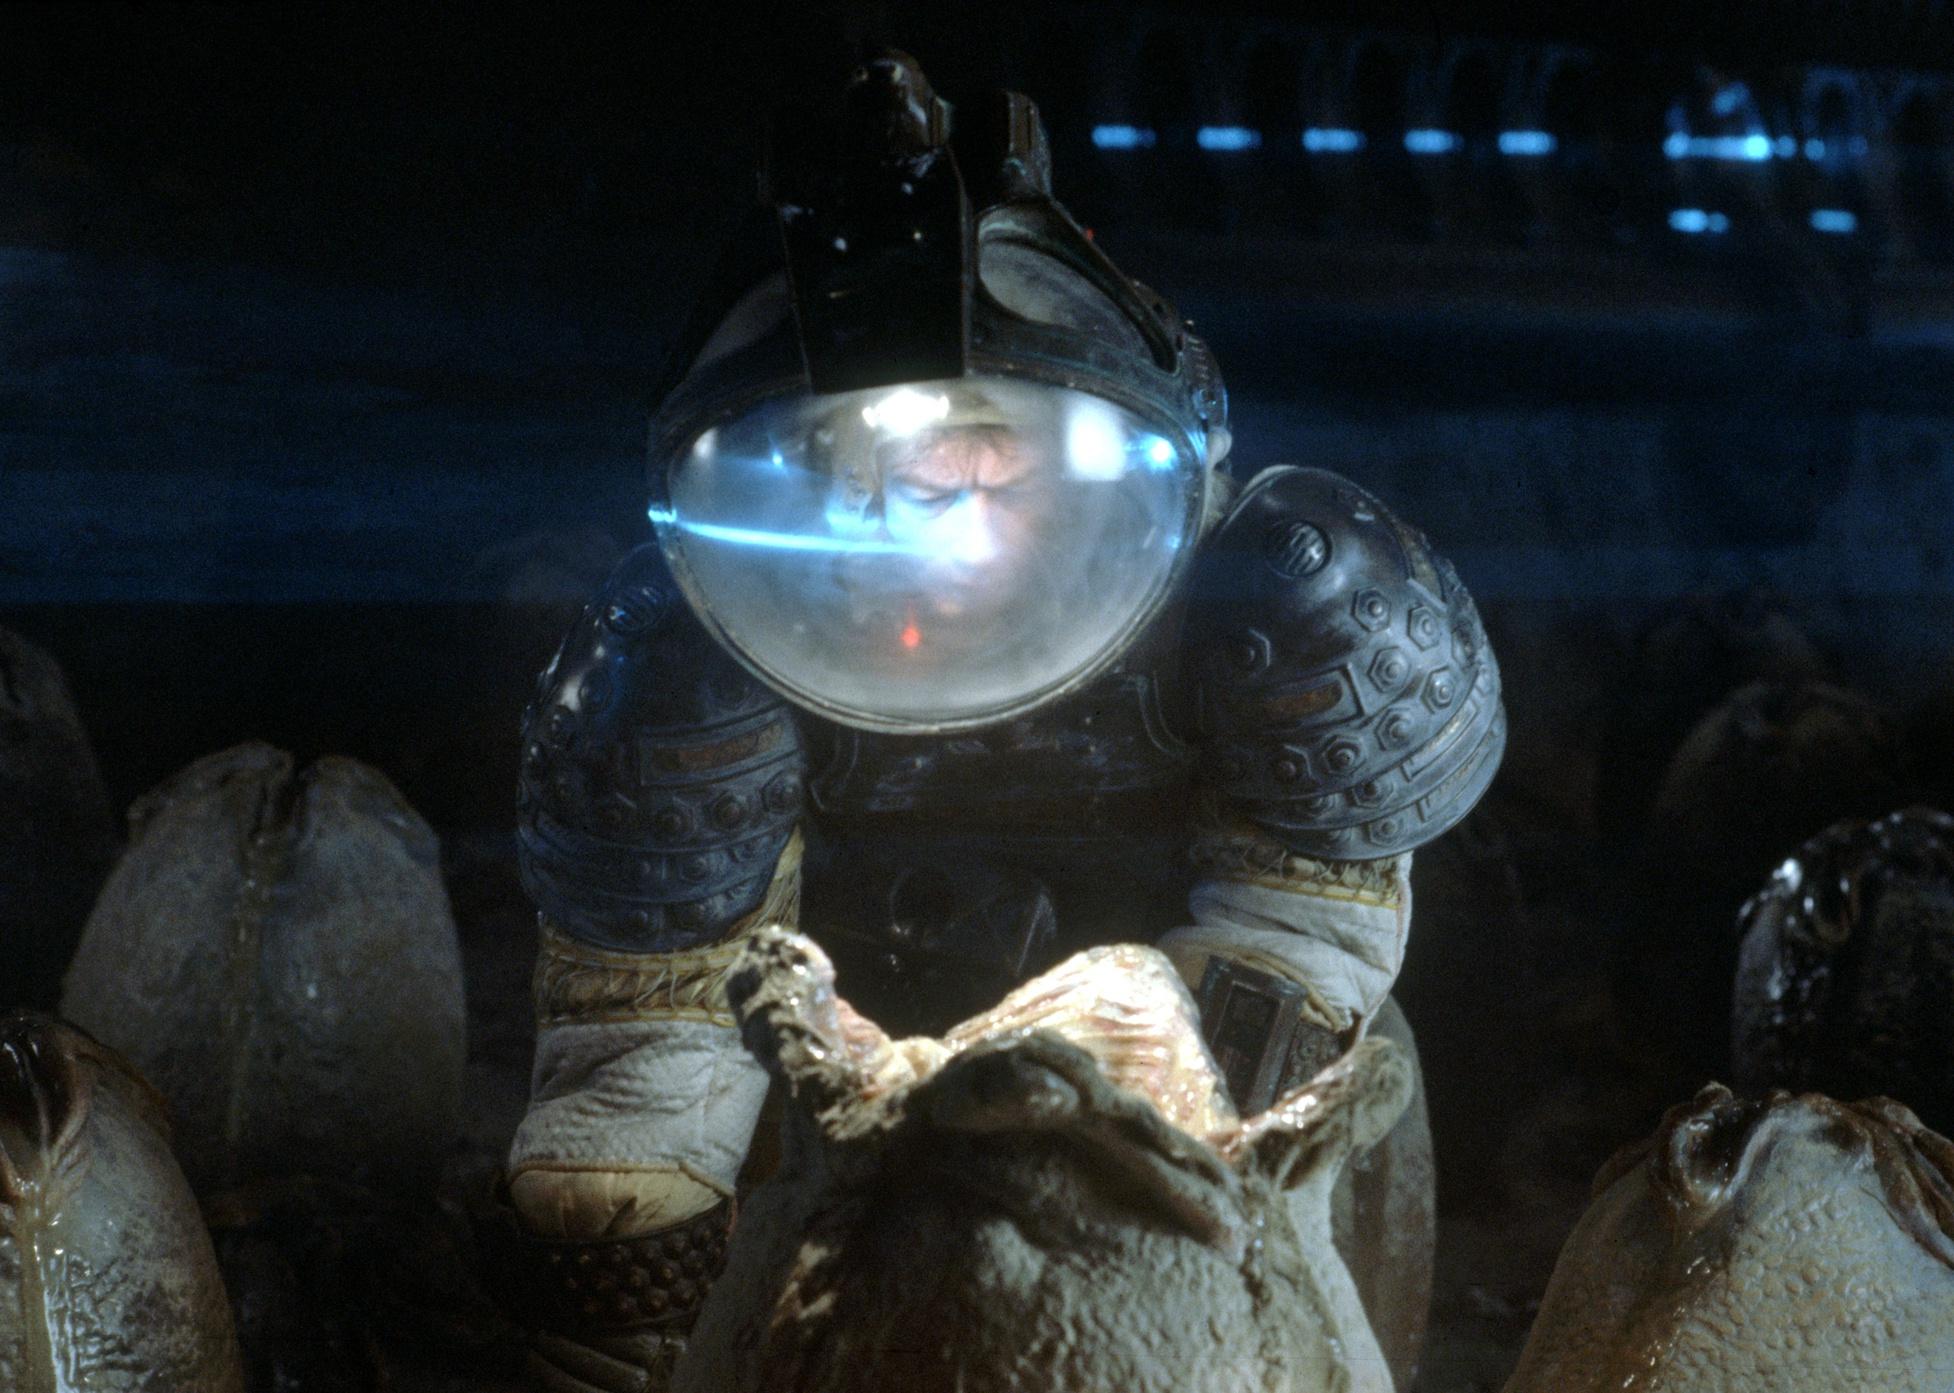 John Hurt, wearing a space suit and helmet, investigates living pods in the ground.